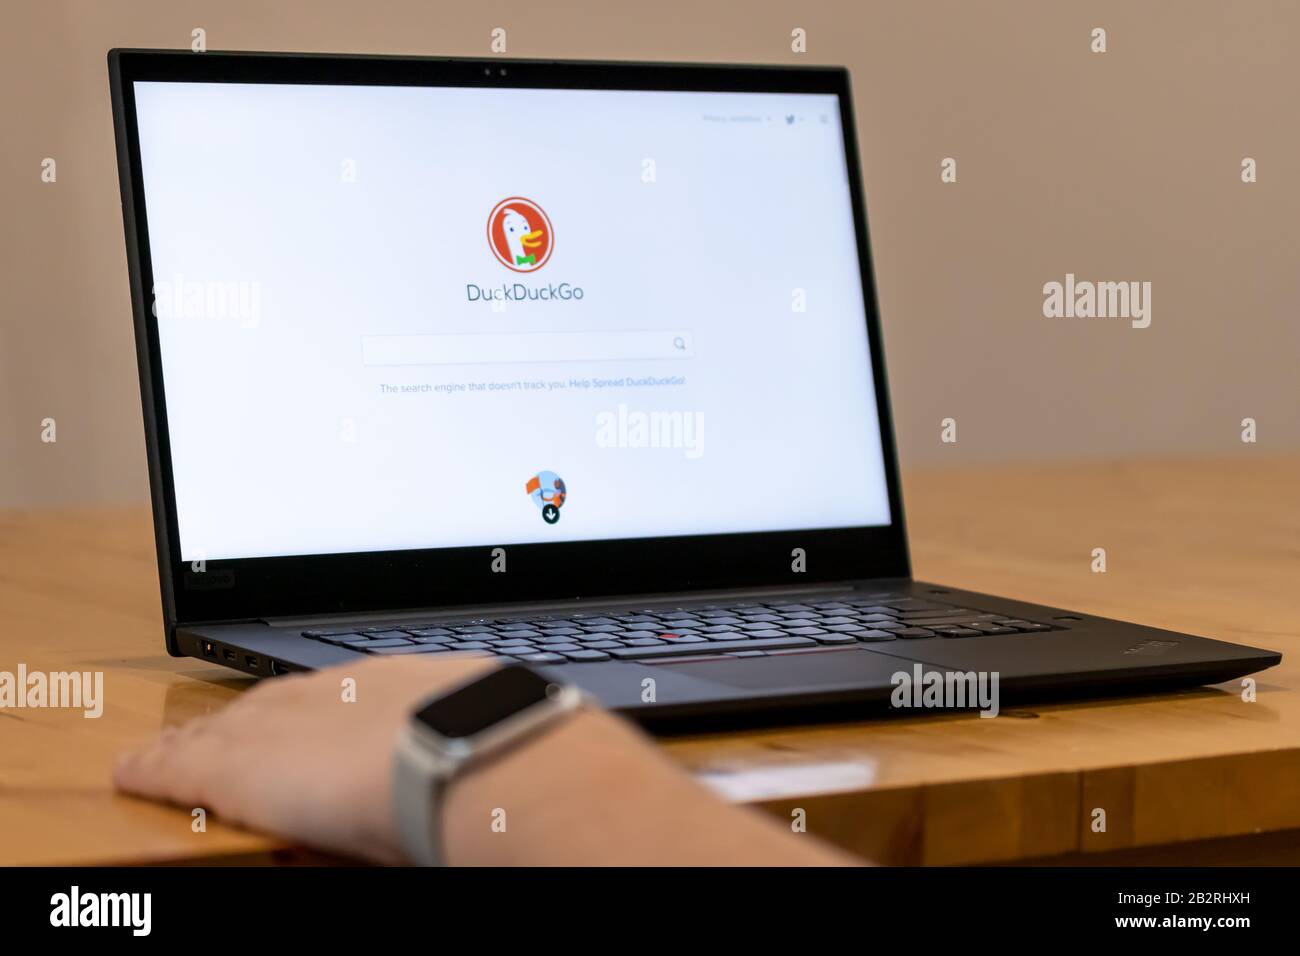 Person sitting at a desk, using DuckDuckGo internet search engine. Stock Photo